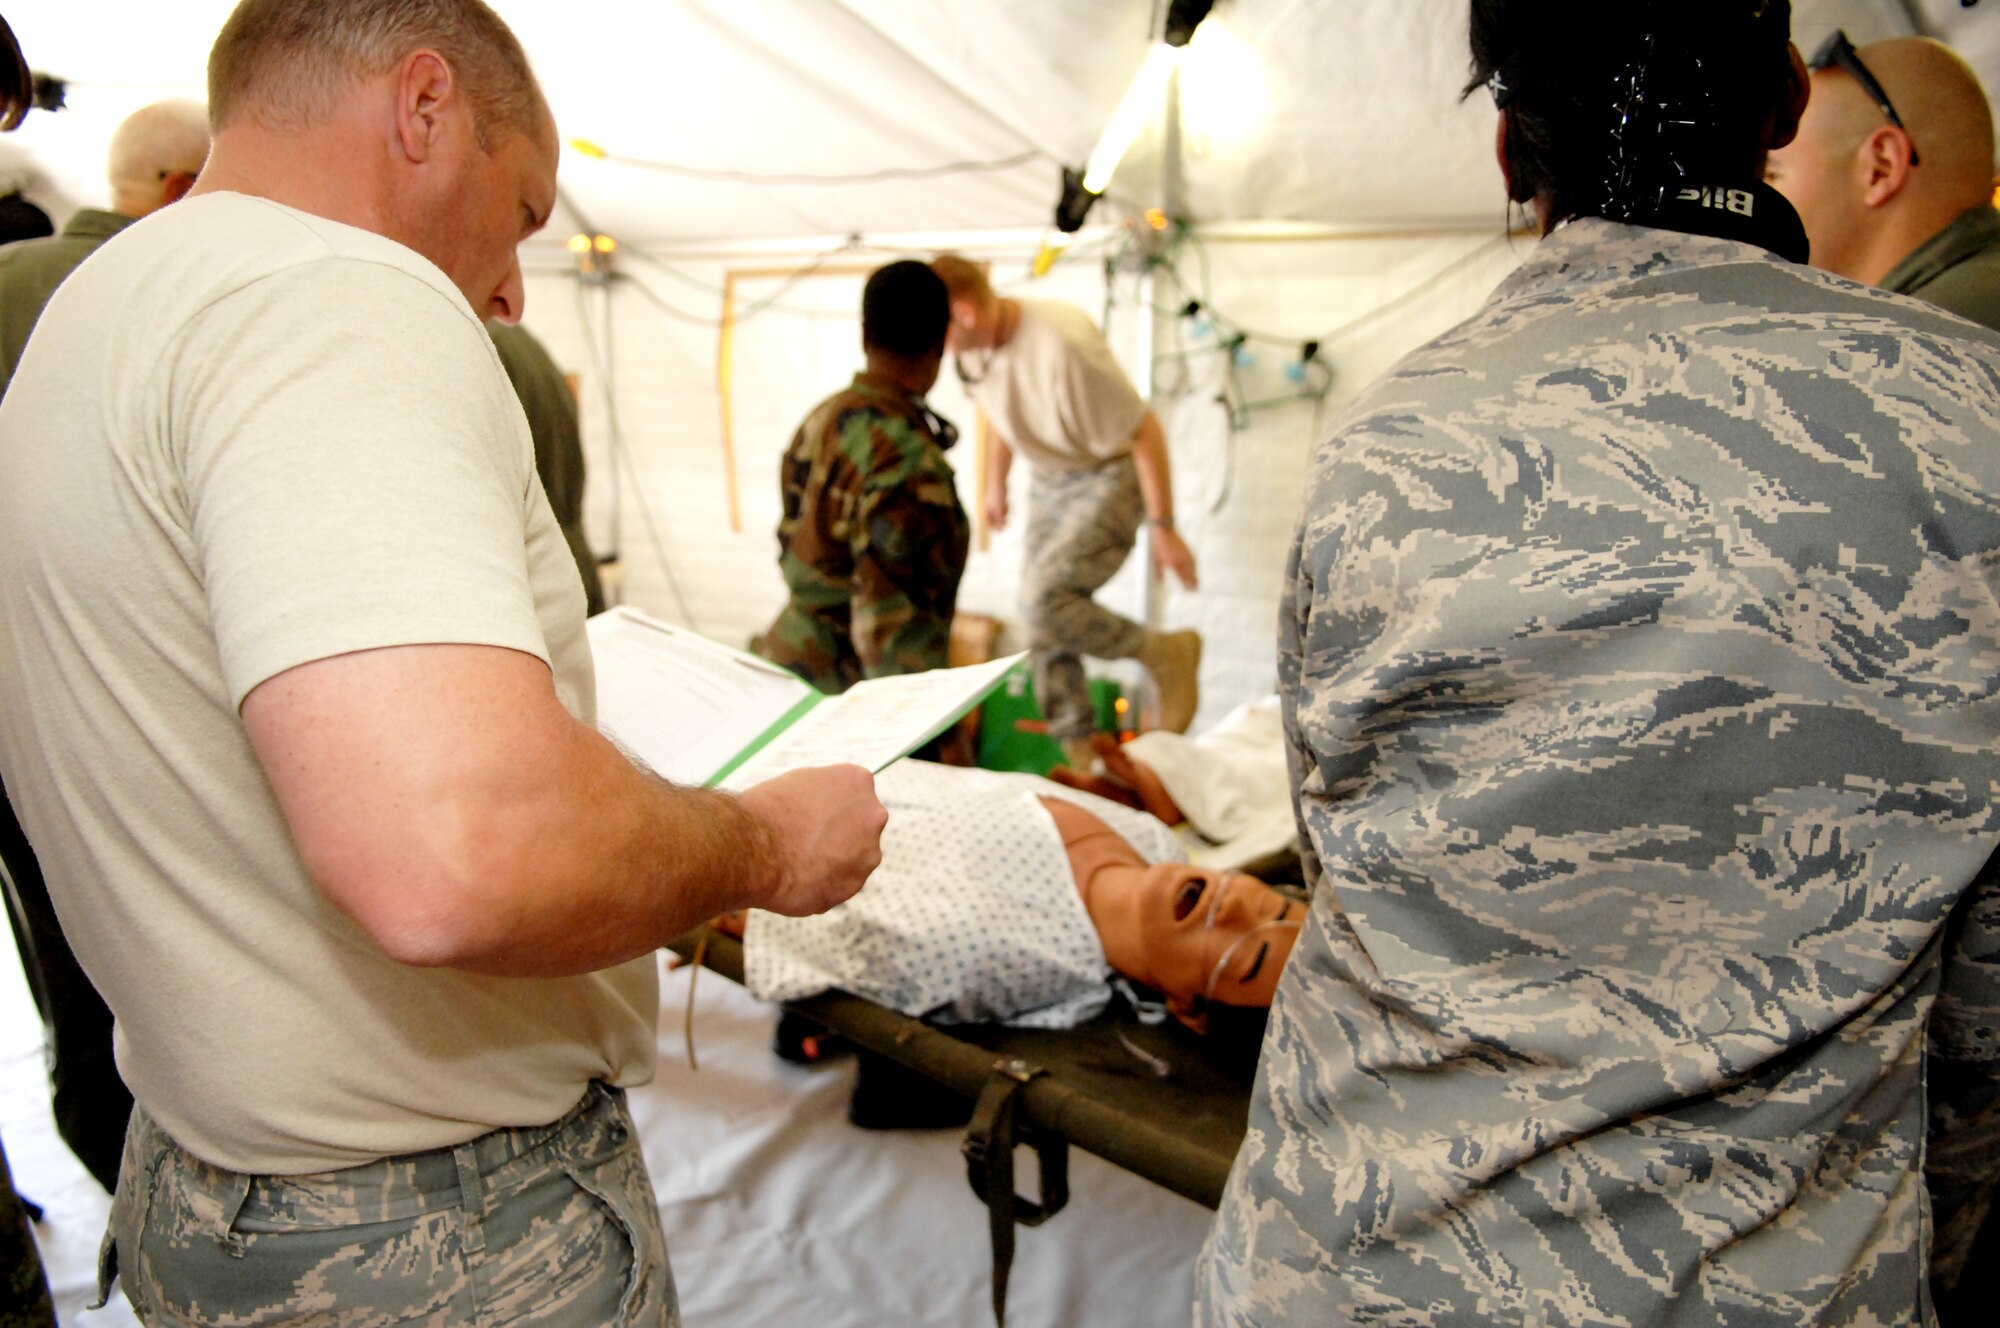 NEW ORLEANS -- Capt. Tom Lionberger, patient movement clinical coordinator from Transportation Command at Scott AFB, Ill., reviews a patient’s chart while he is carried into the Disaster Aeromedical Staging Facility during an evacuation exercise at the New Orleans Lakefront Airport May 18. The exercise was controlled by the Louisiana Department of Health and Hospitals with the help of multiple military counterparts including Air Mobility Command and United States Transportation Command members from Scott AFB. (U.S. Air Force photo by Senior Airman Samantha S. Crane)